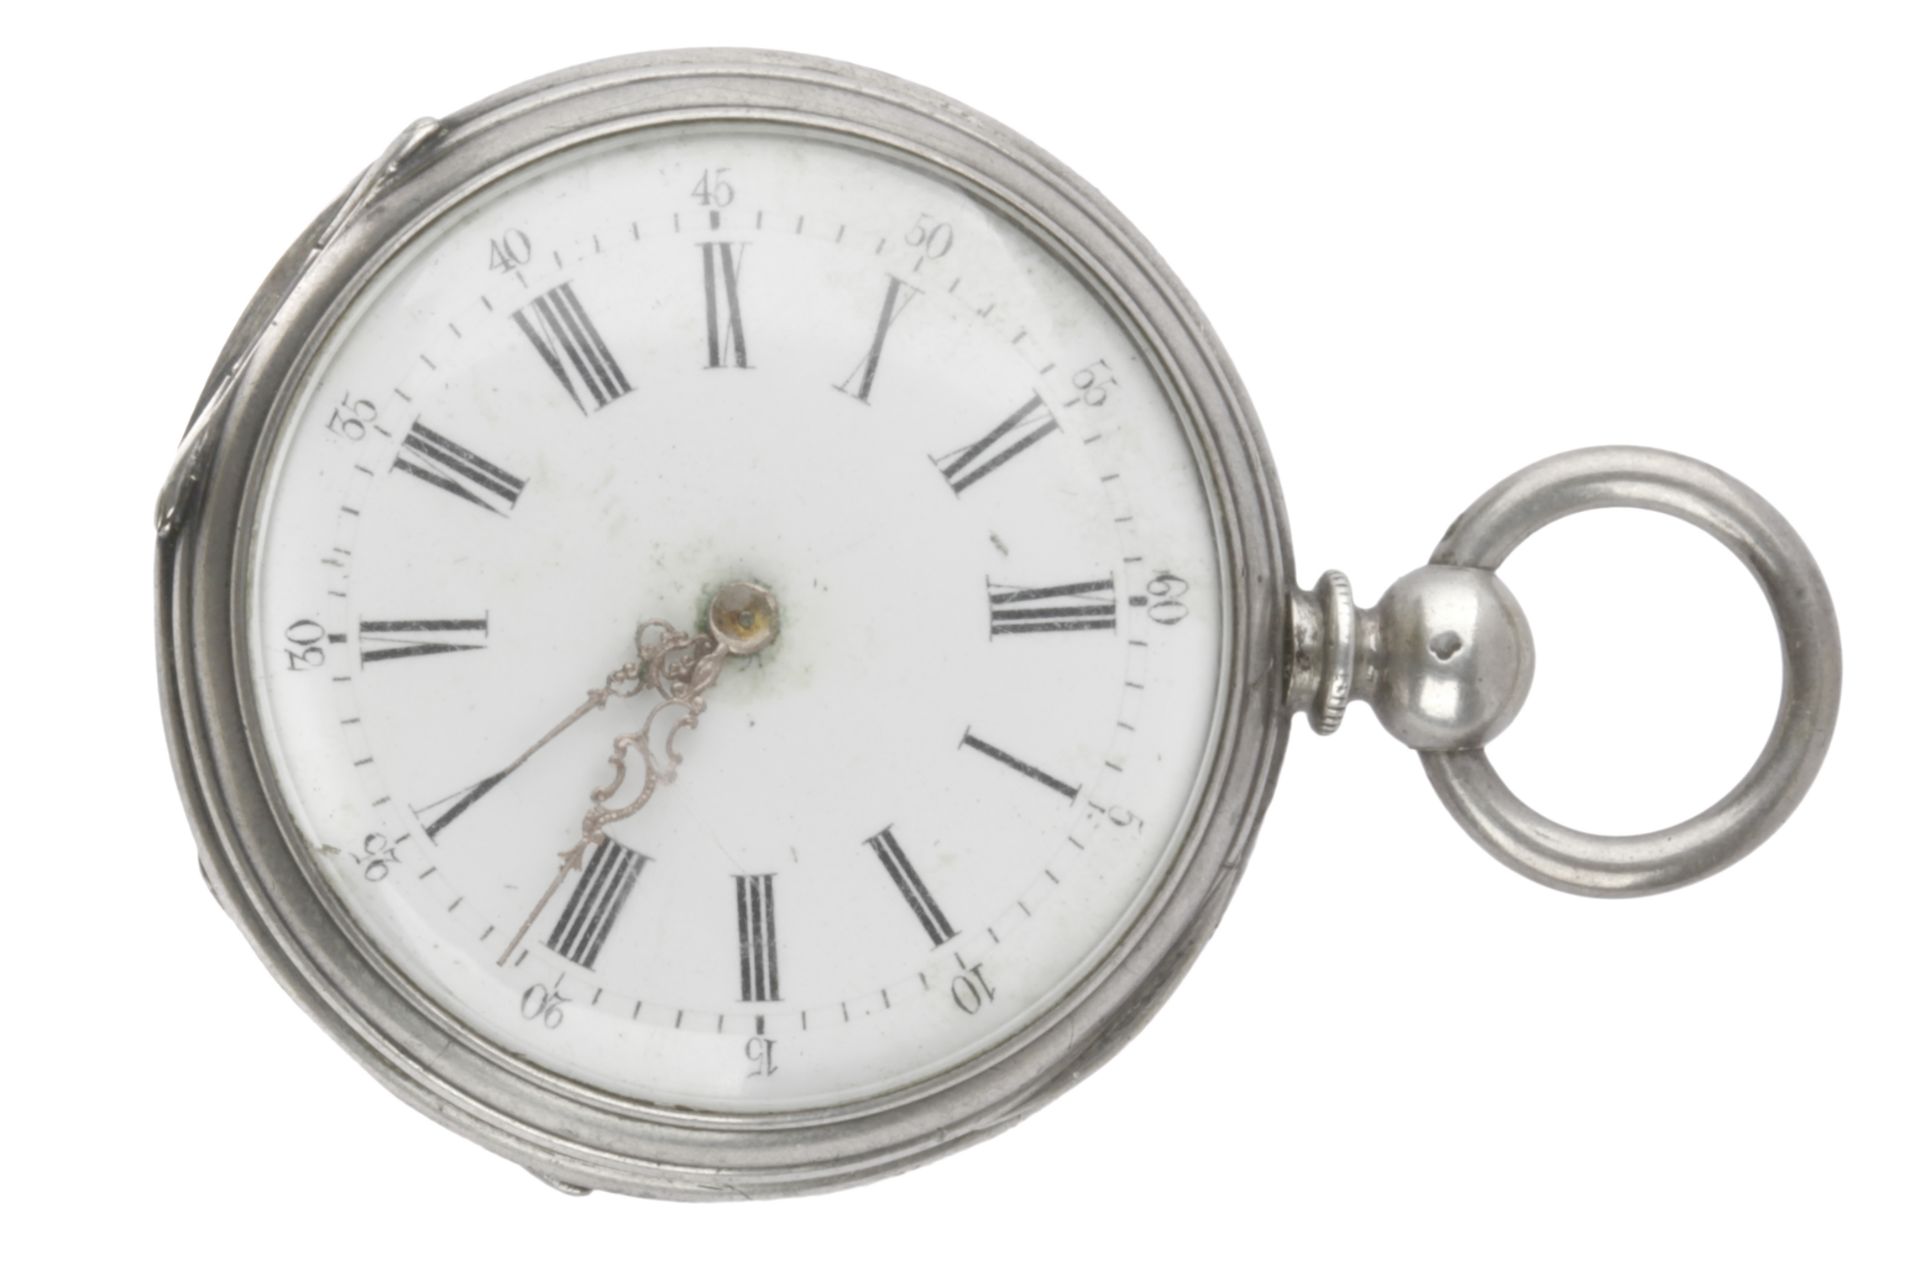 Late 19th century-early 20th century Swiss or French open face silver plated pocket watch